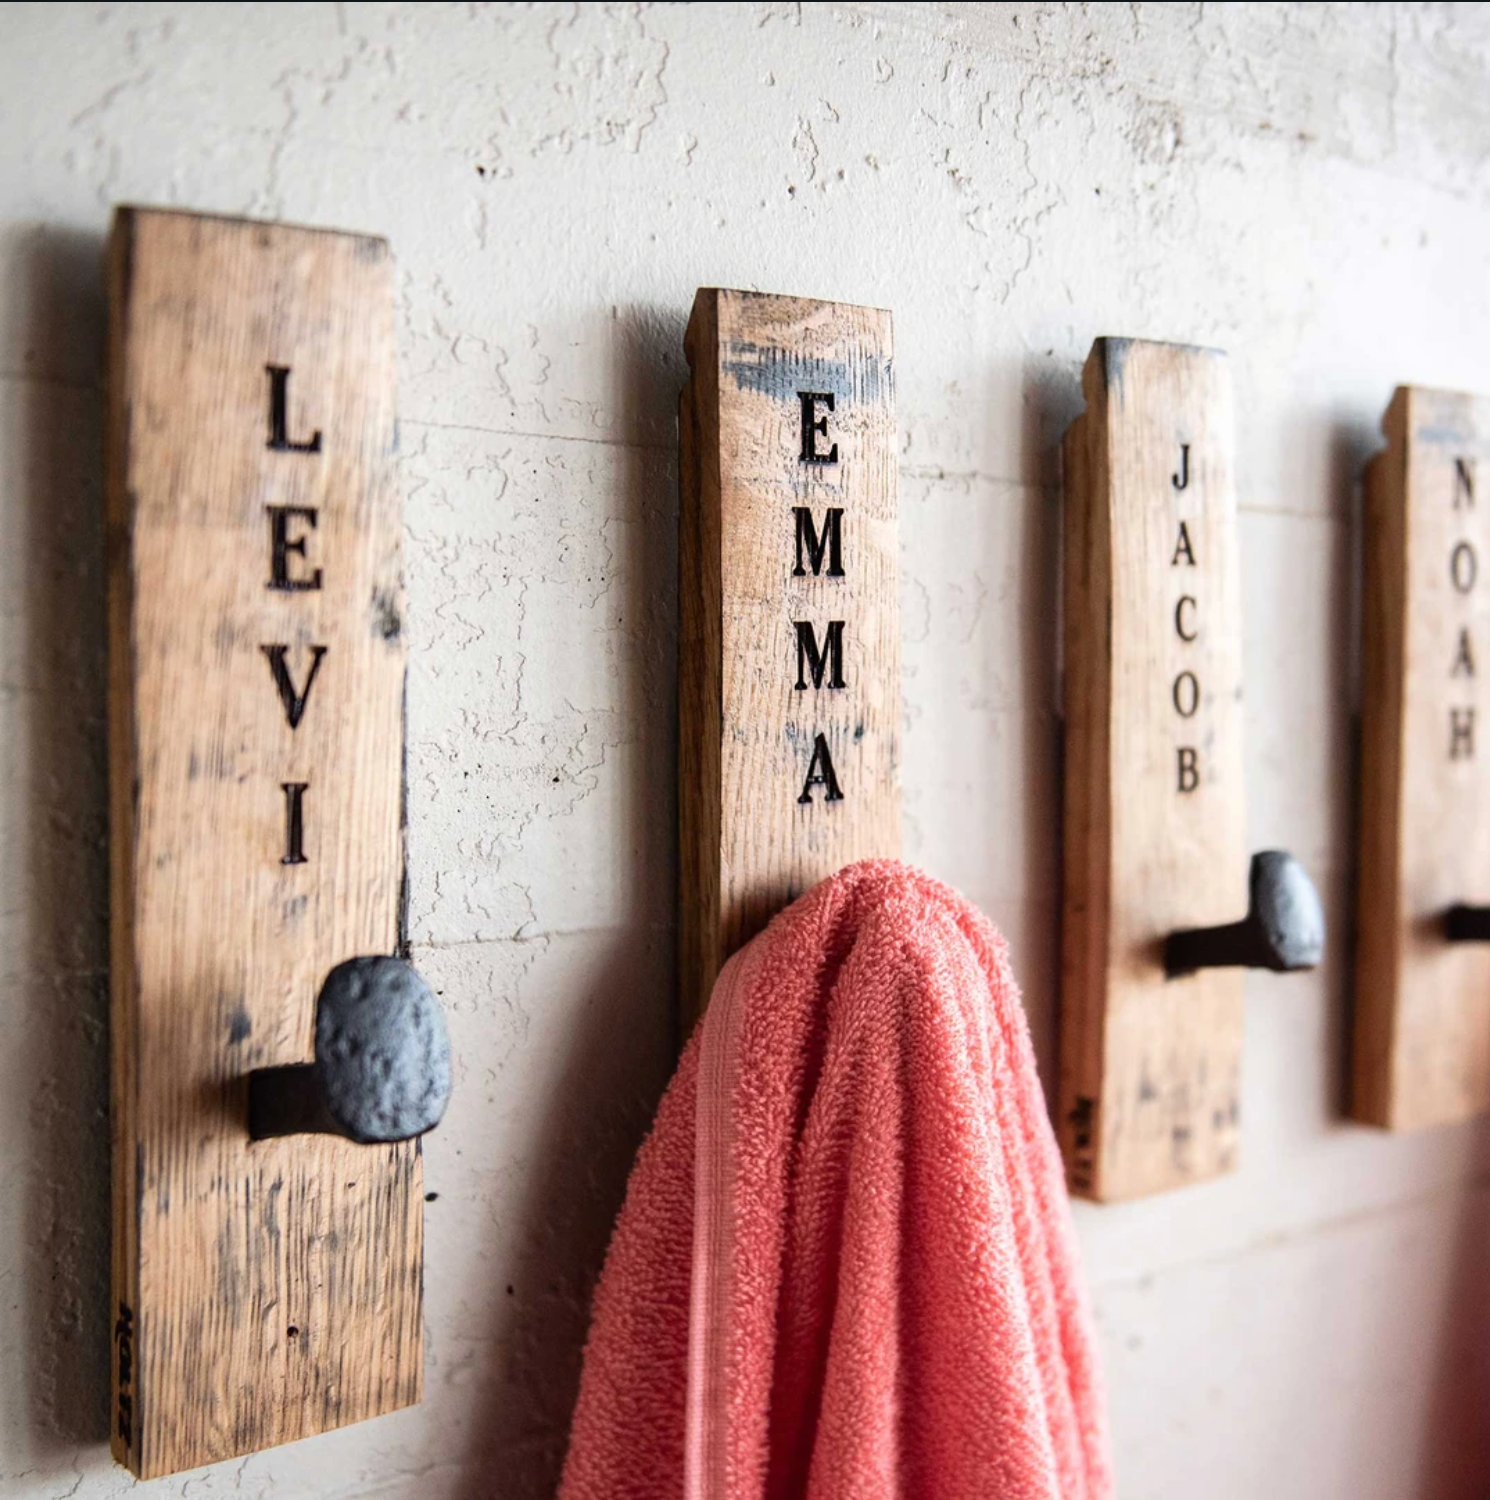 Personalized Towel Hanger Wall Hooks Made from Whiskey Barrel